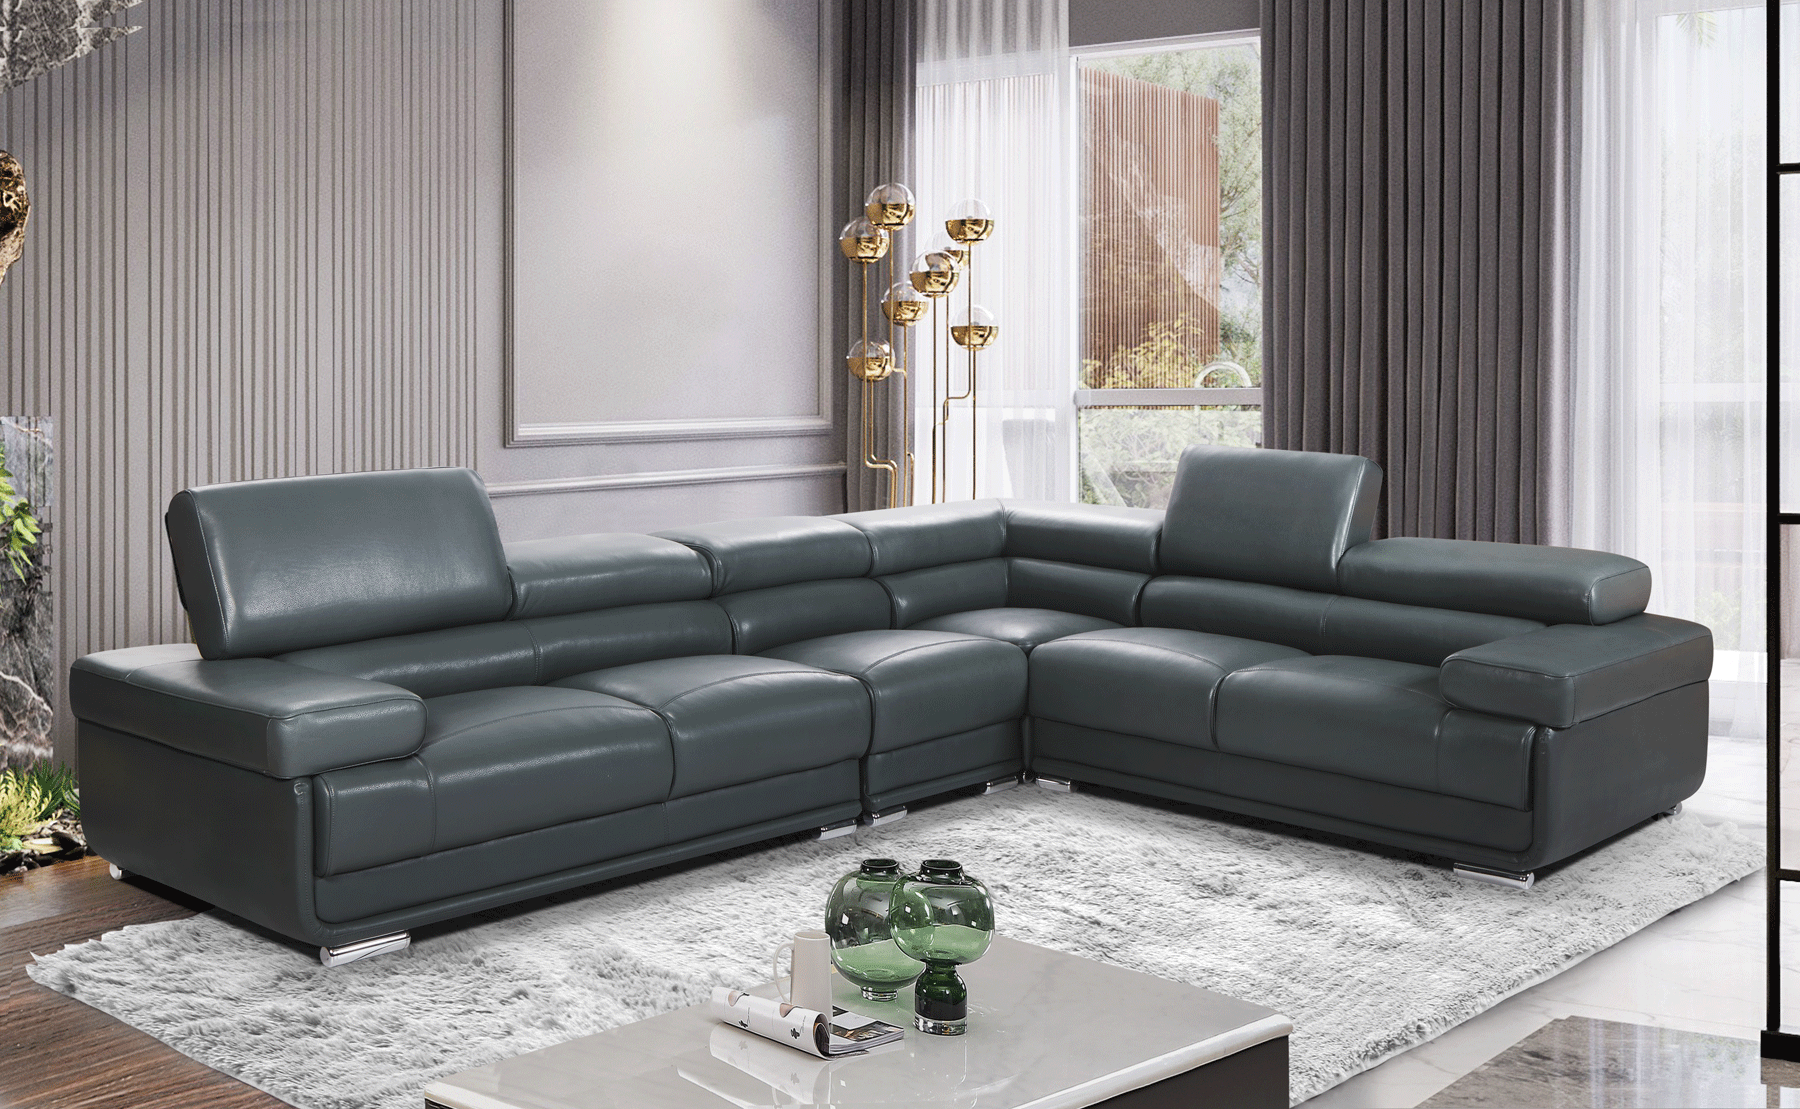 Living Room Furniture Sleepers Sofas Loveseats and Chairs 2119 Sectional Dark Grey